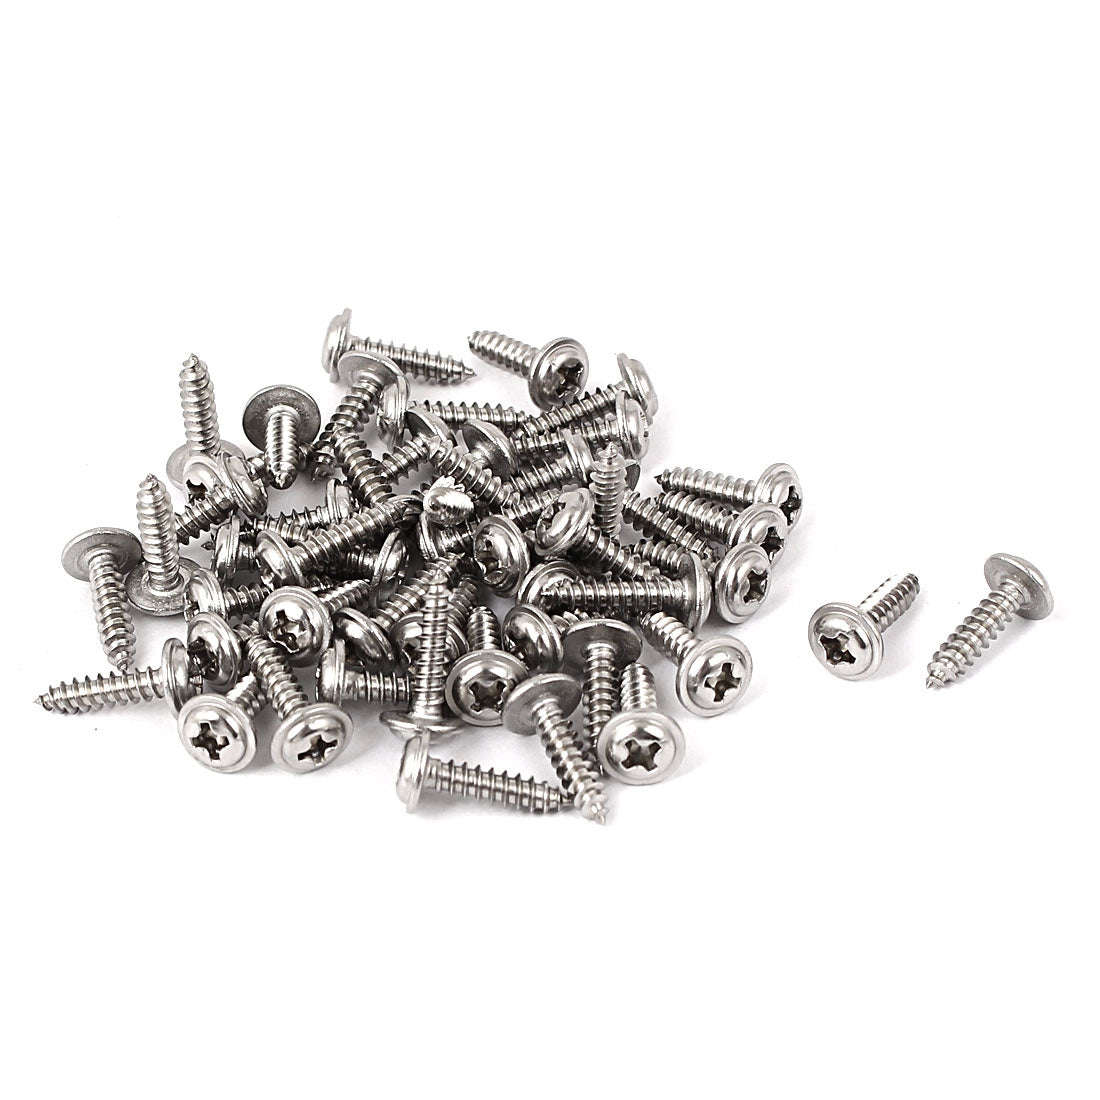 uxcell ST2x6mm White Screws Self Tapping Screws, 100pcs Pan Head Phillips  Wood Screws for Woodworking